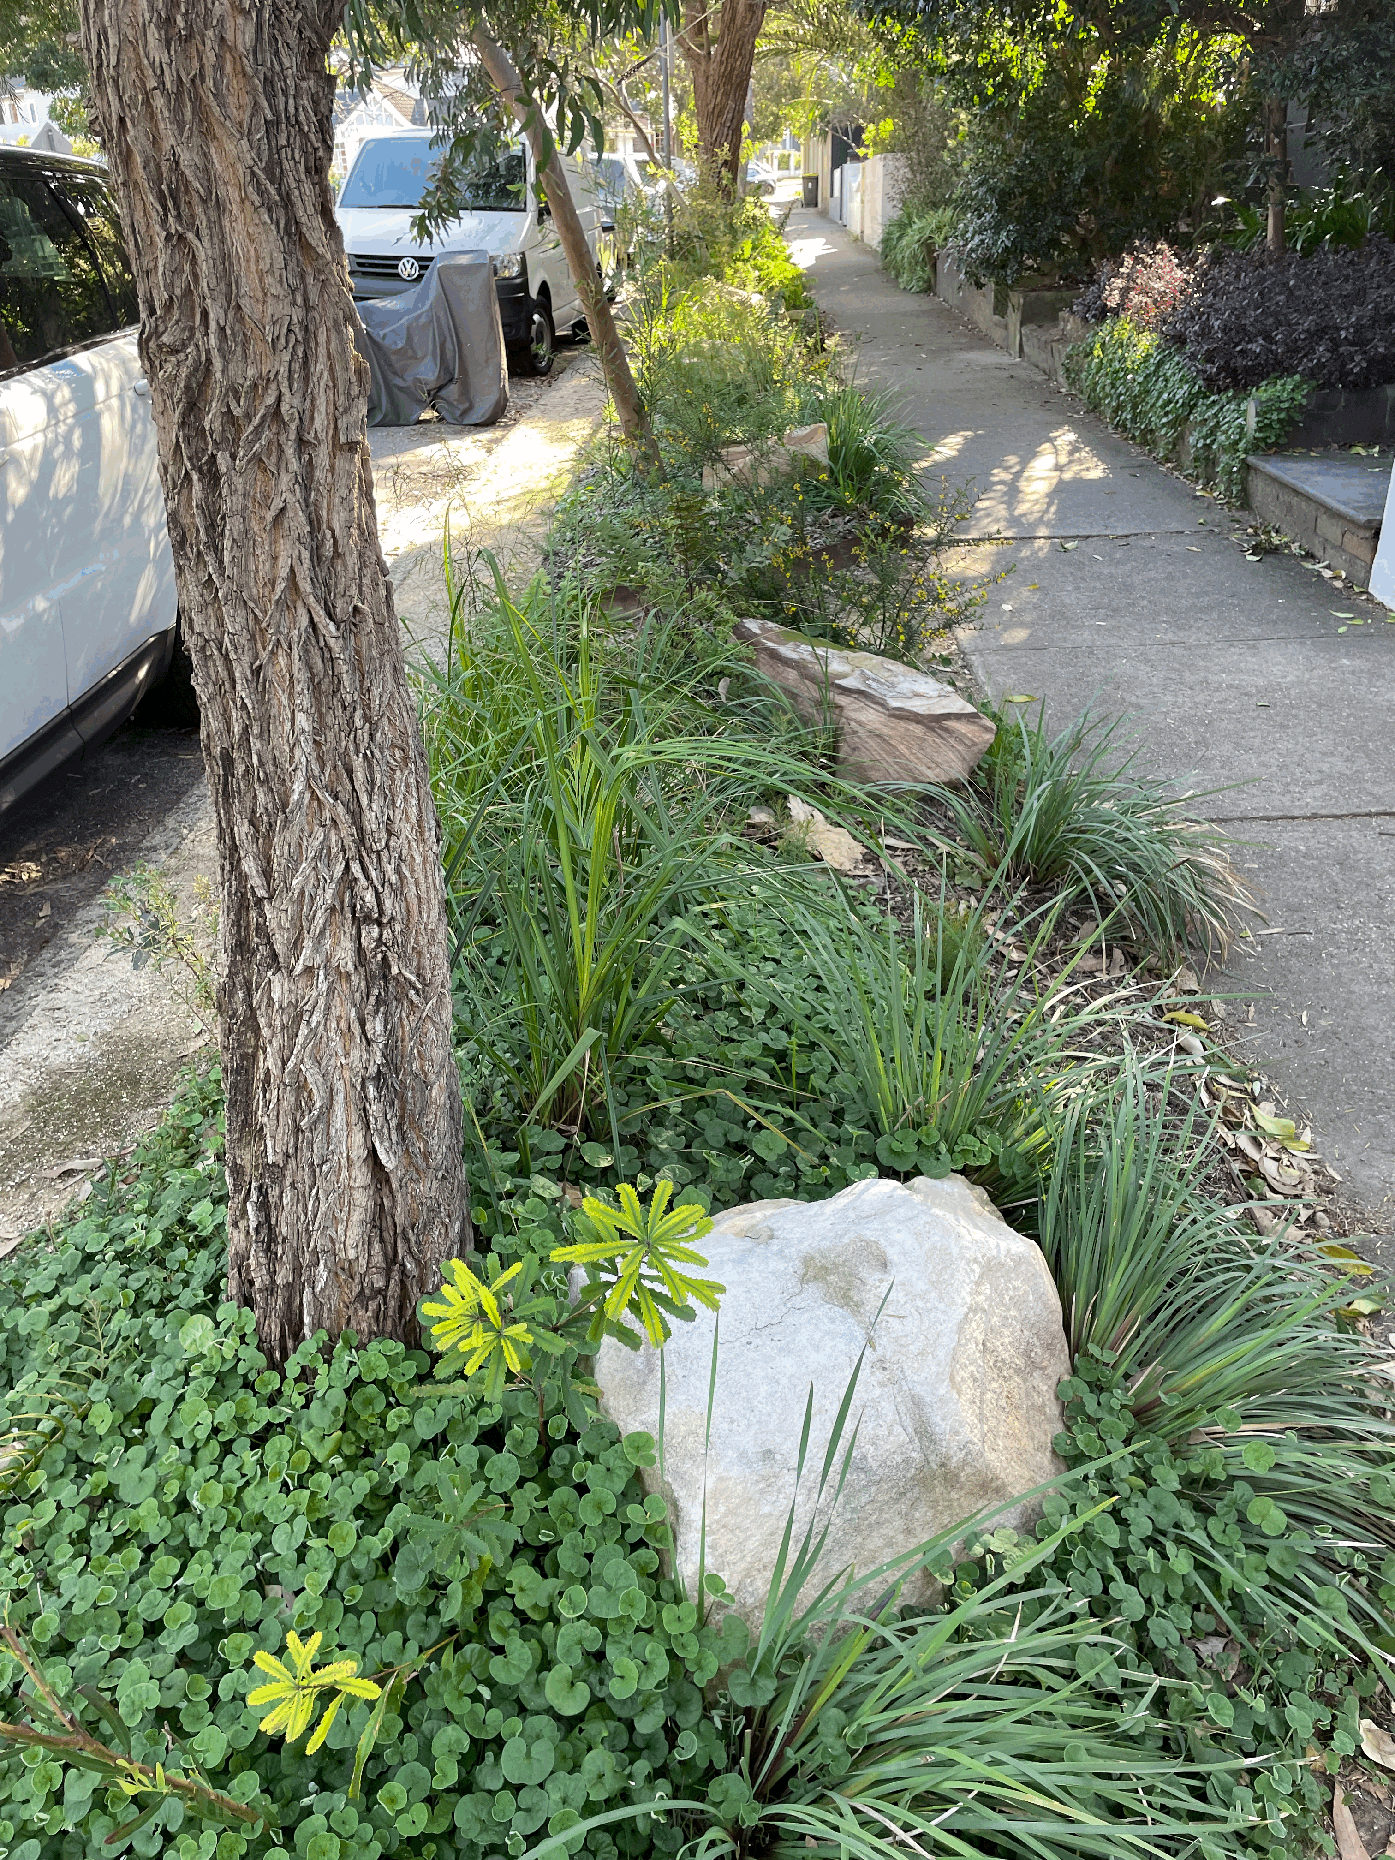 Residents on this Sydney street worked together to create this native verge - Theodore Smith